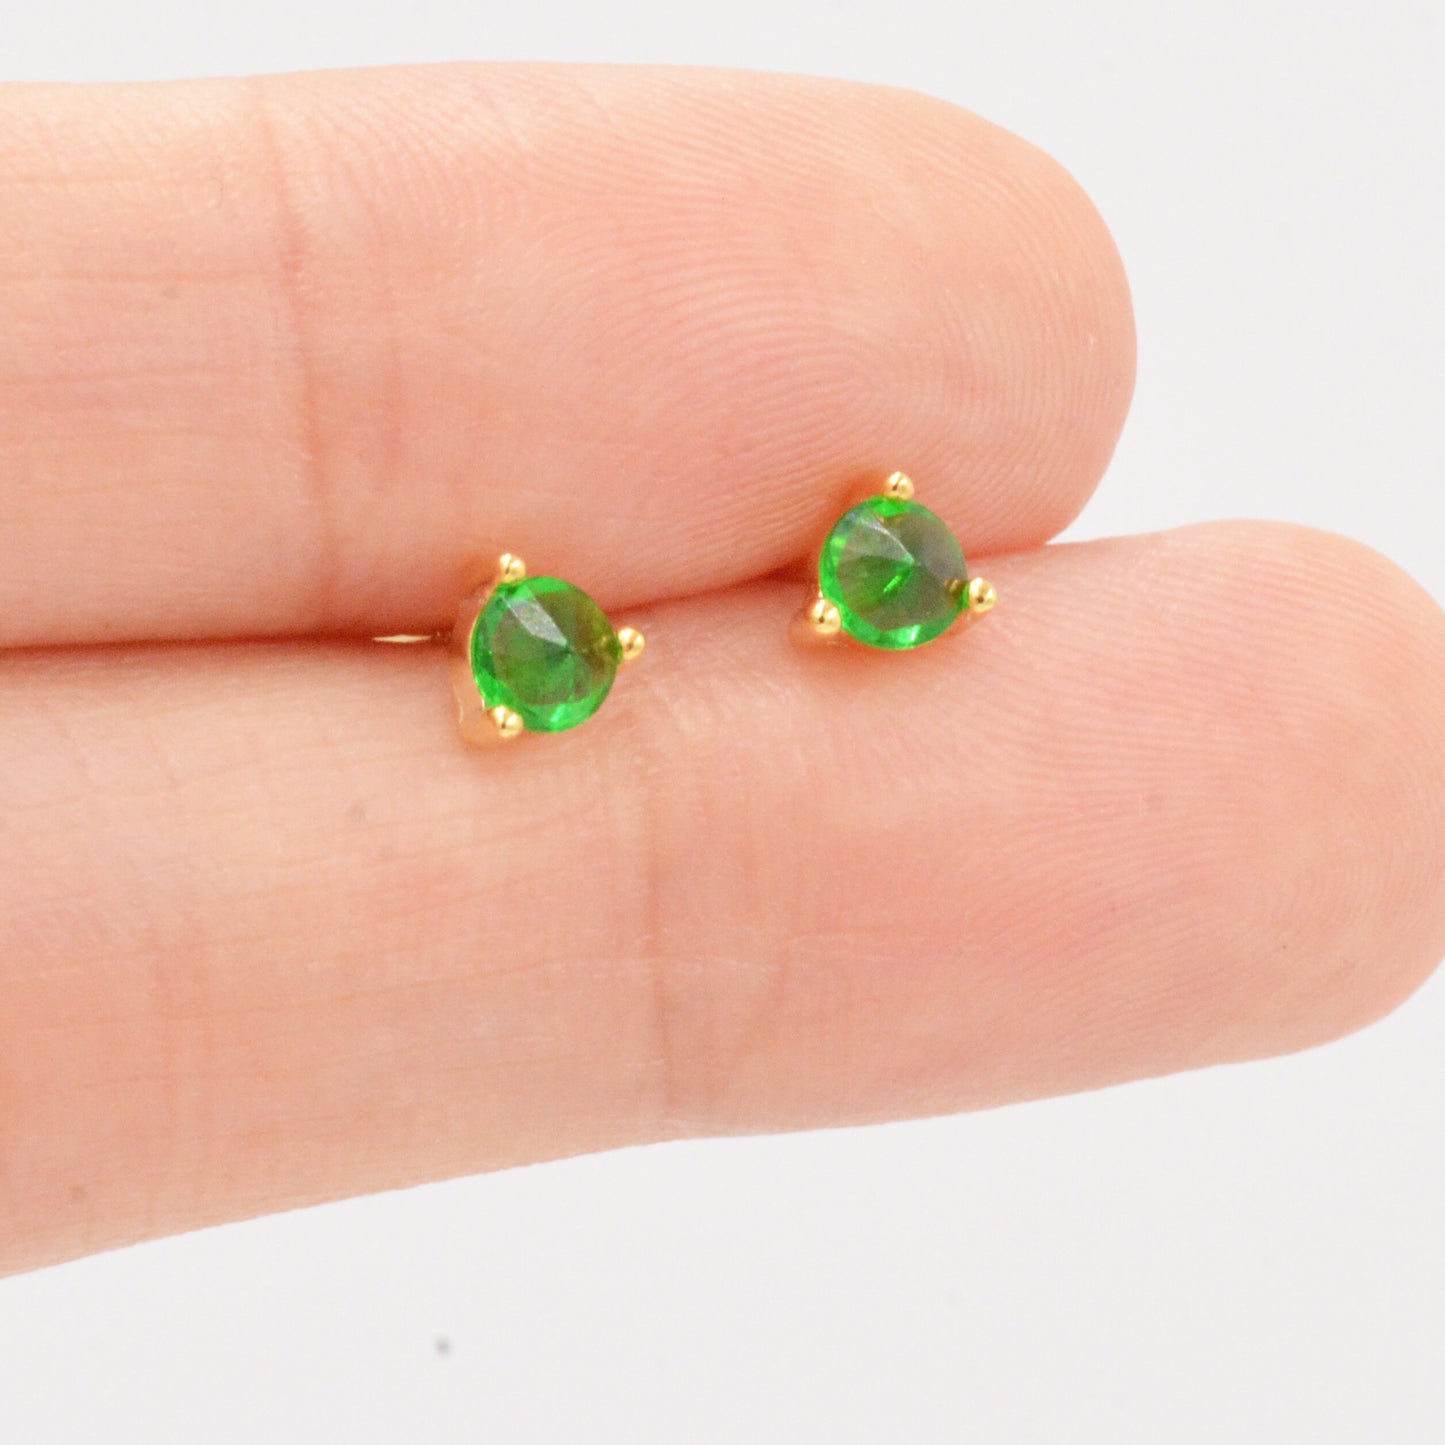 Inverted Emerald Green Crystal Stud Earrings in Sterling Silver, 3mm Three Prong, Gold or Silver, Tiny Stud